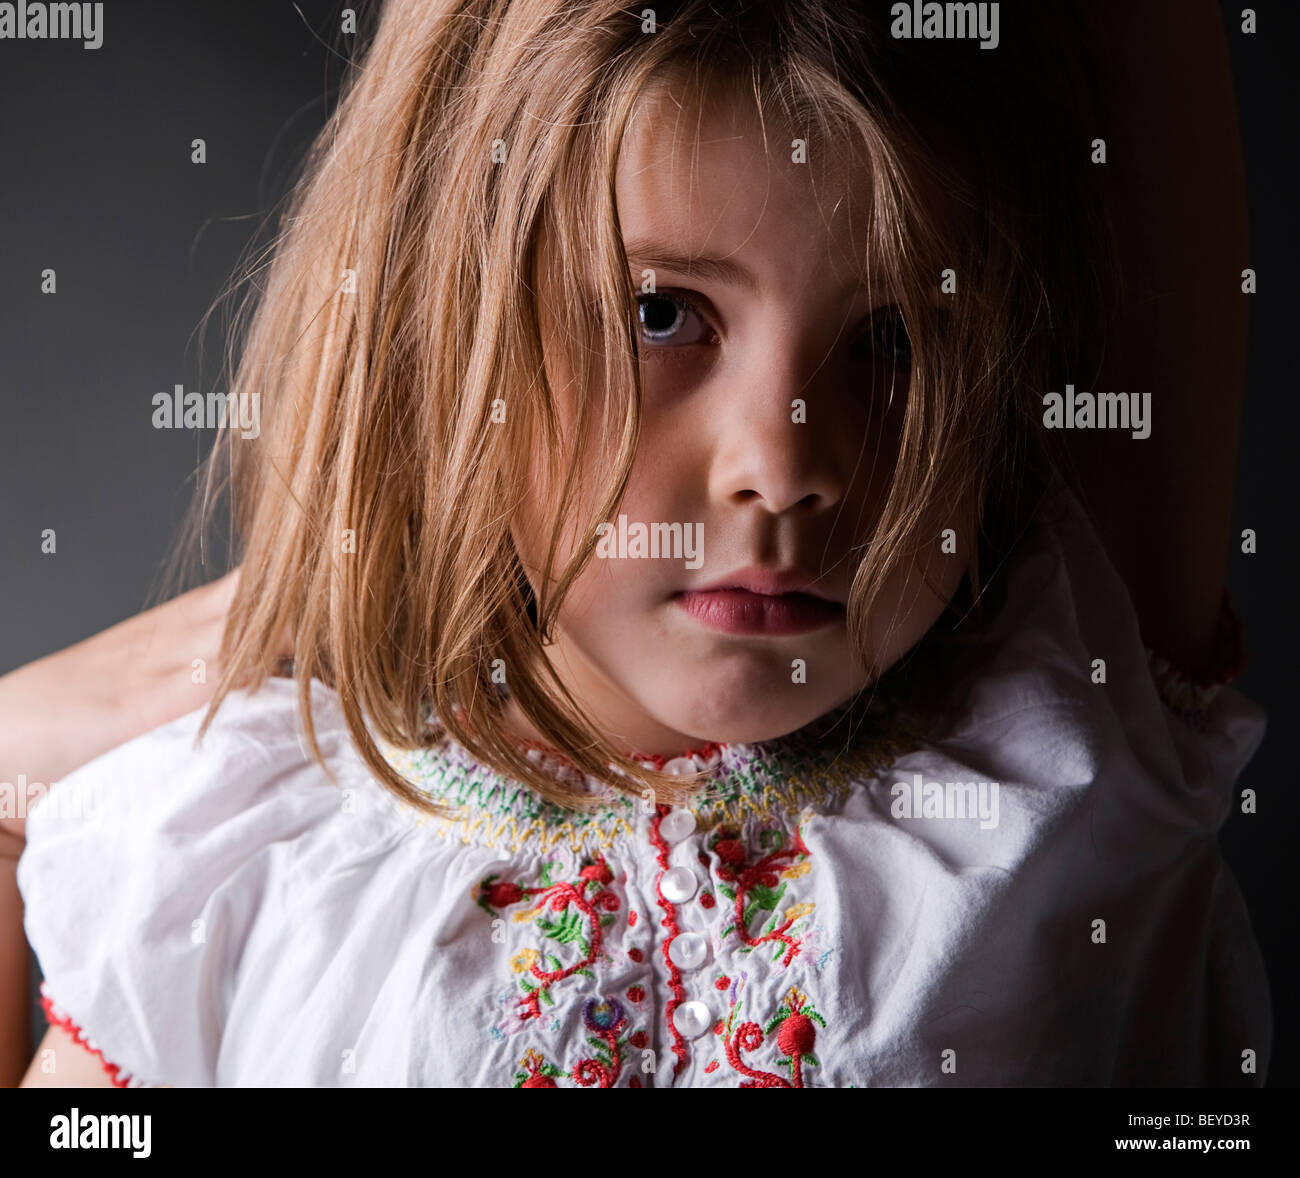 An adorable little girl in a vulnerable pose looking concerned Stock Photo